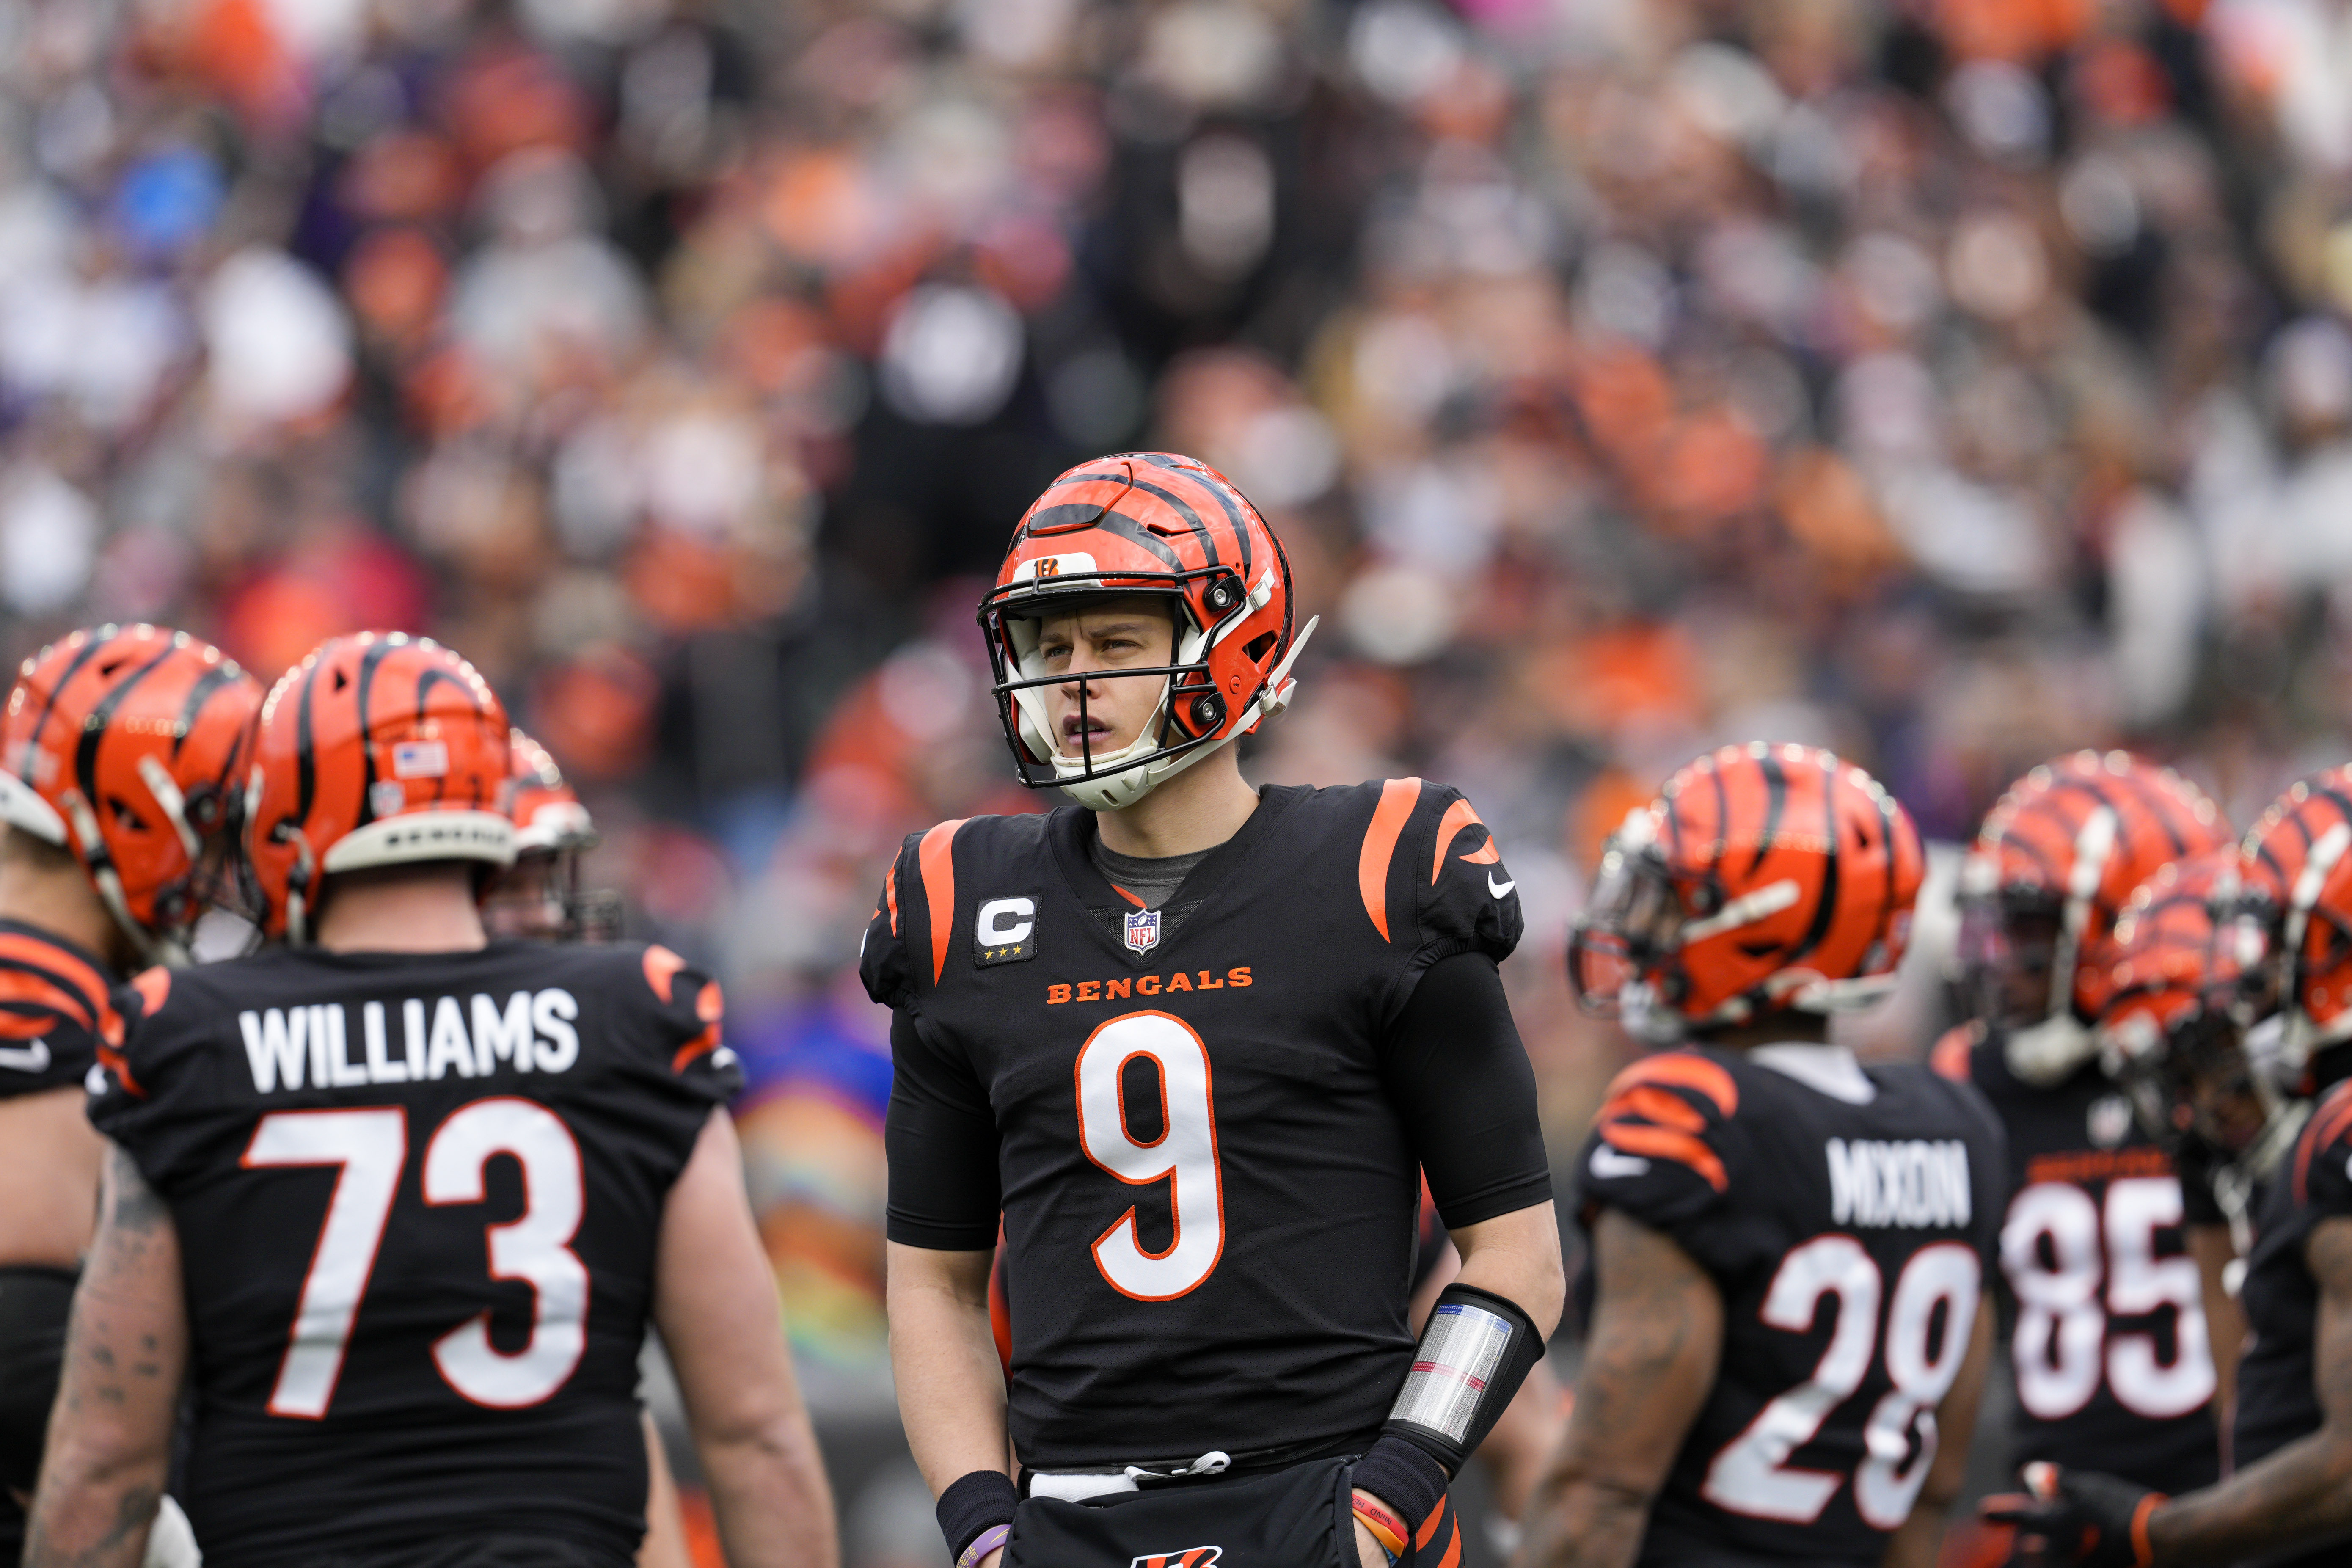 will bengals game be on peacock